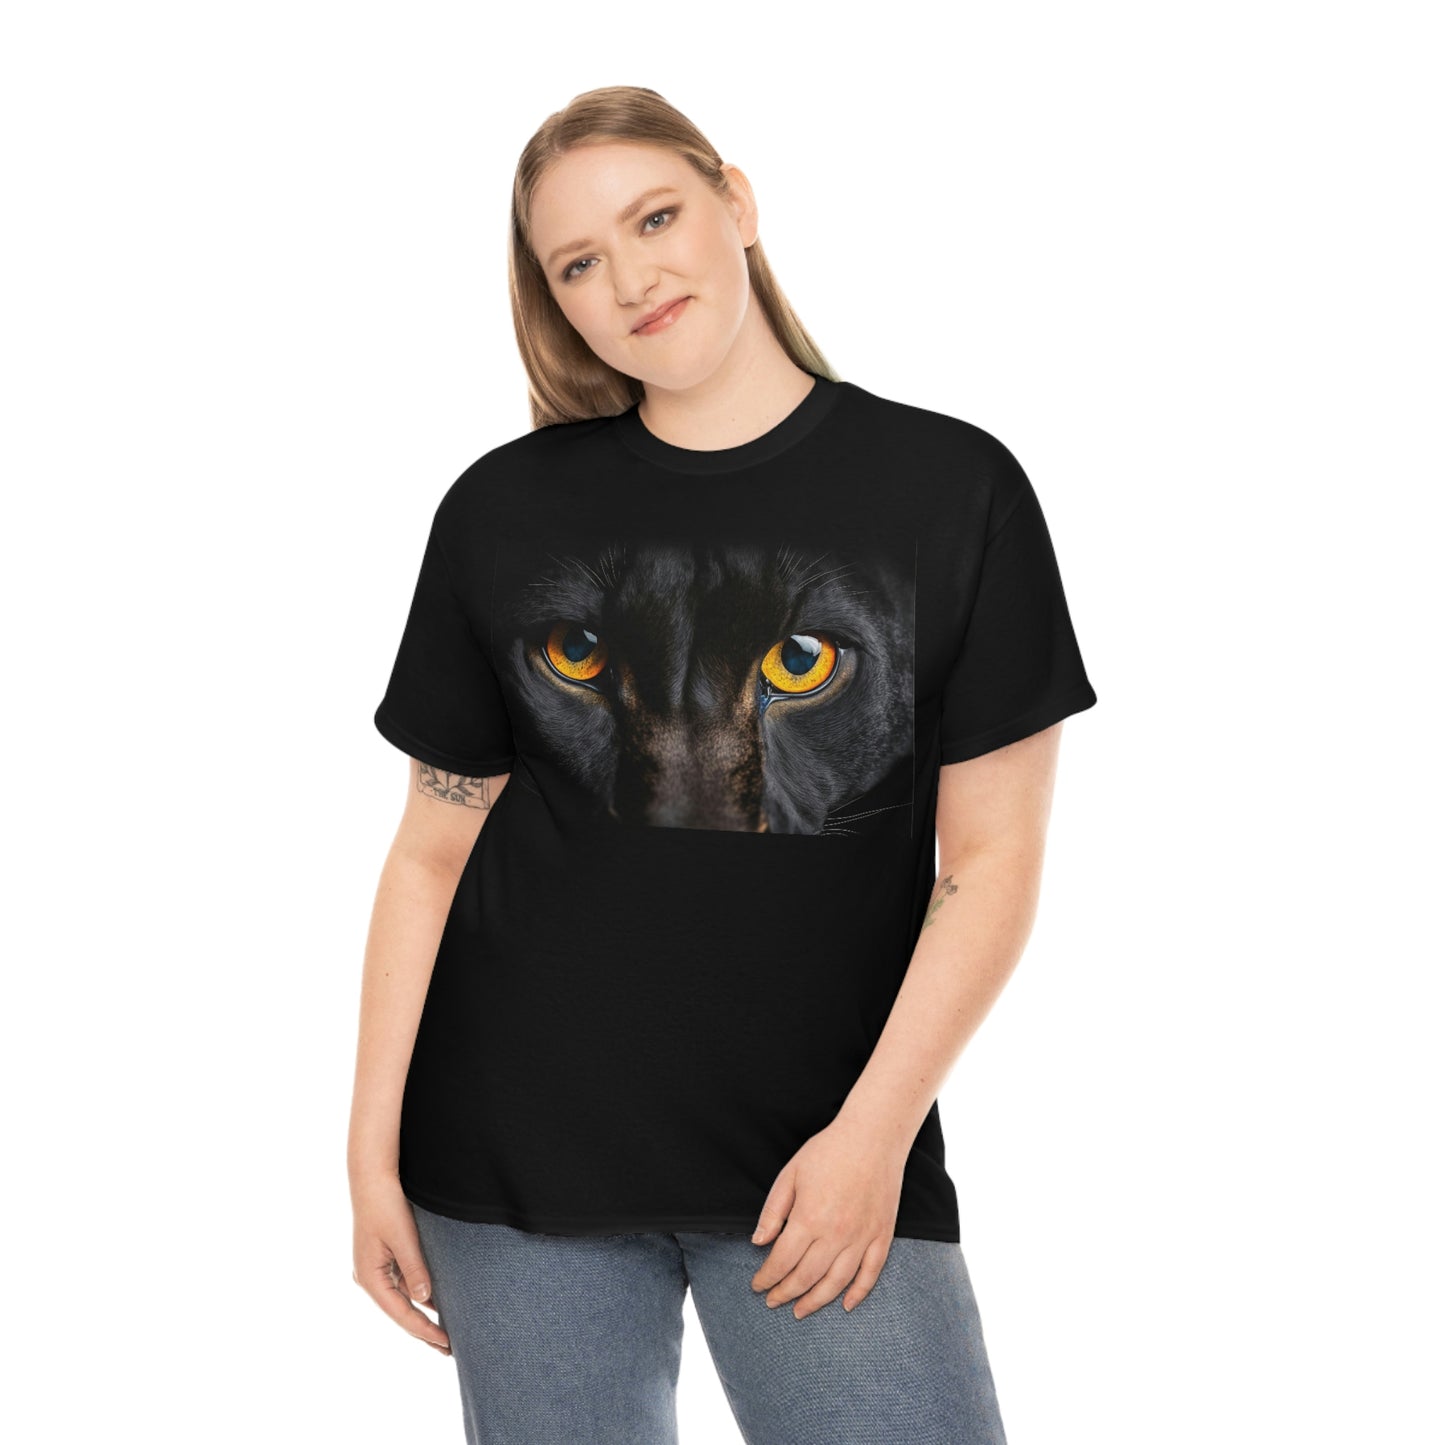 Get Noticed with Our Black Cat Eyes T-Shirt - Perfect for Cat Lovers and Those Who Love Unique Apparel!